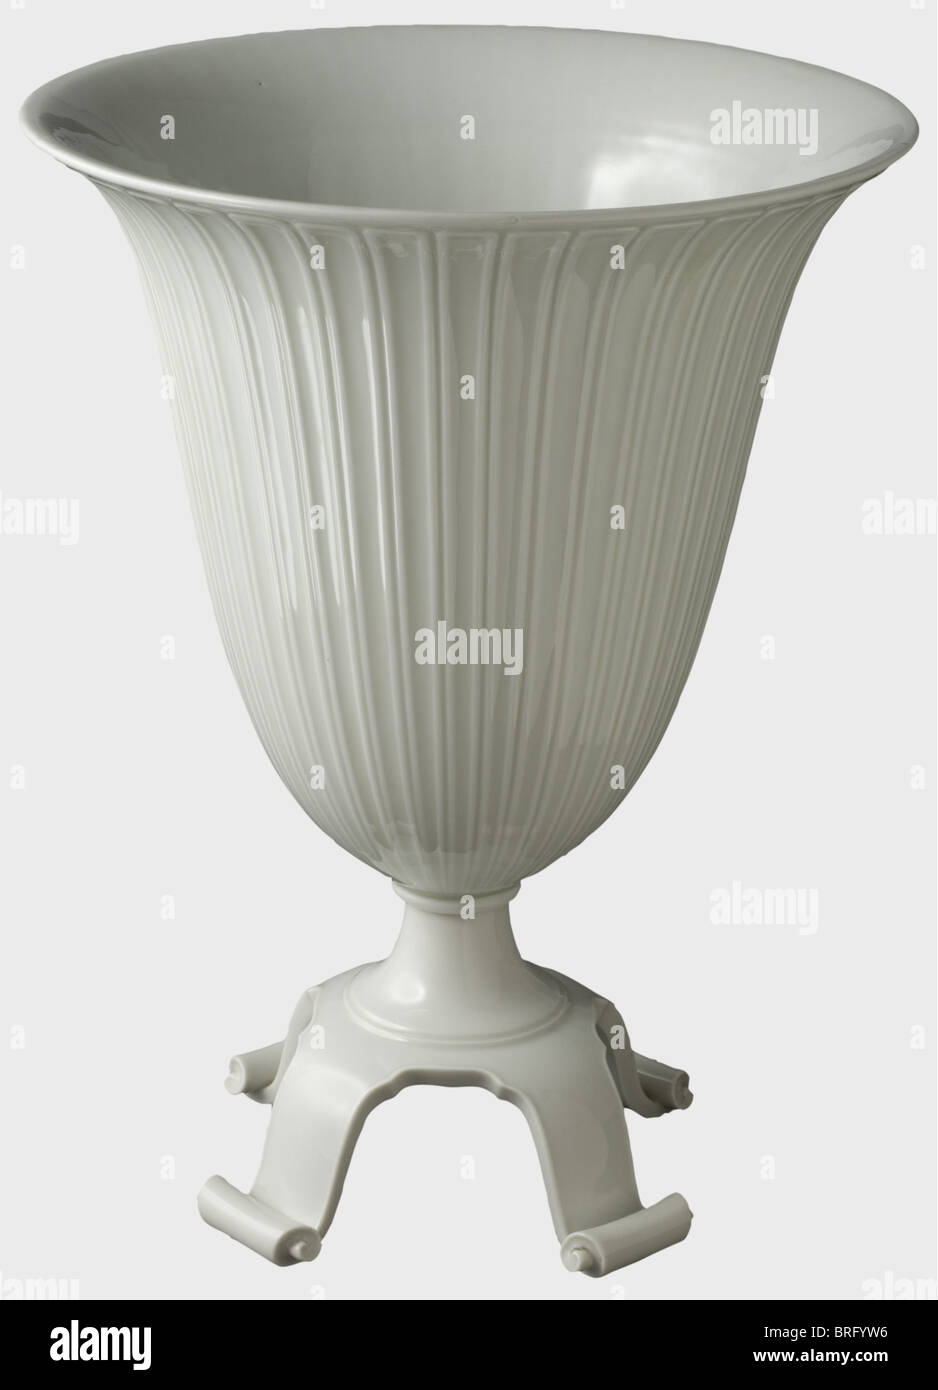 A krater vase, Allach Porcelain Factory Design by Adolf Röhring. Model Number '515'. White, glazed porcelain. Signature, model number, and manufacturer's pressmark on the bottom. Height 33.5 cm. Of great rarity., historic, historical, 1930s, 1930s, 20th century, vessel, vessels, object, objects, stills, clipping, clippings, cut out, cut-out, cut-outs, Additional-Rights-Clearences-Not Available Stock Photo